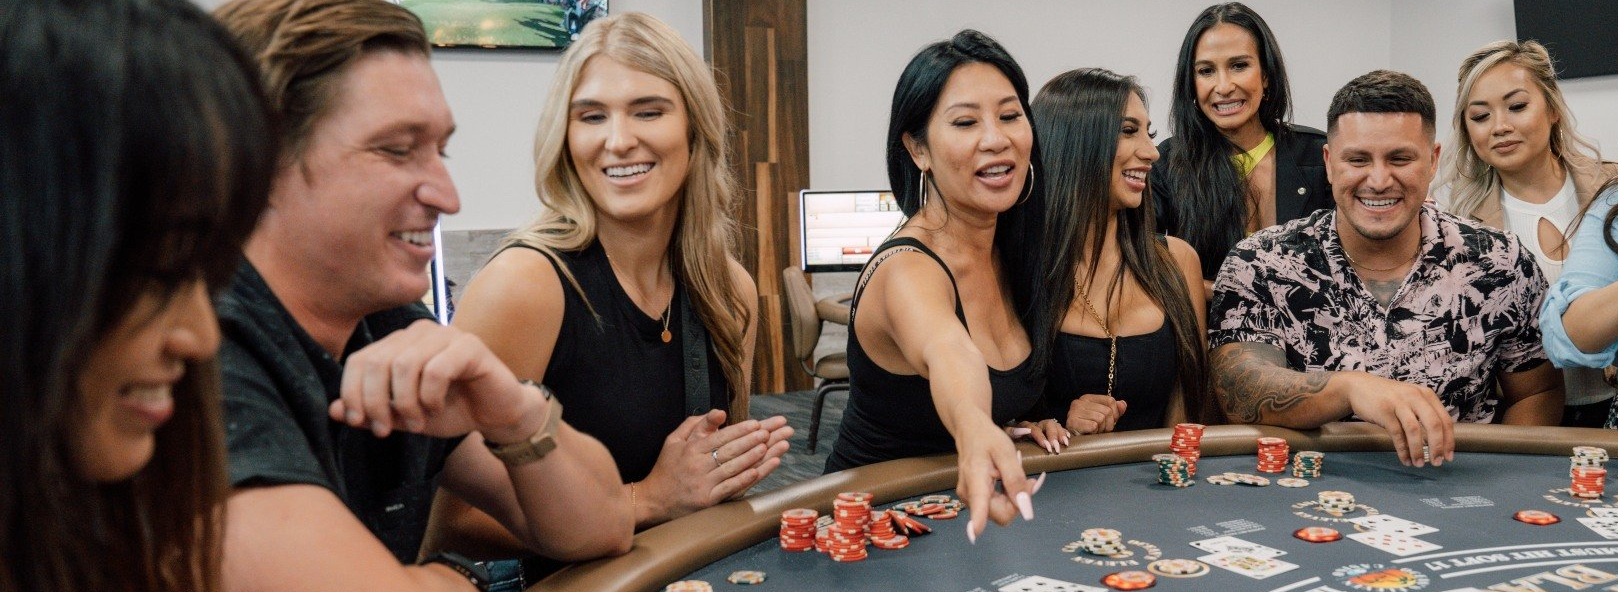 A group of young friends gather around a blackjack table and are all smiling and laughing while …